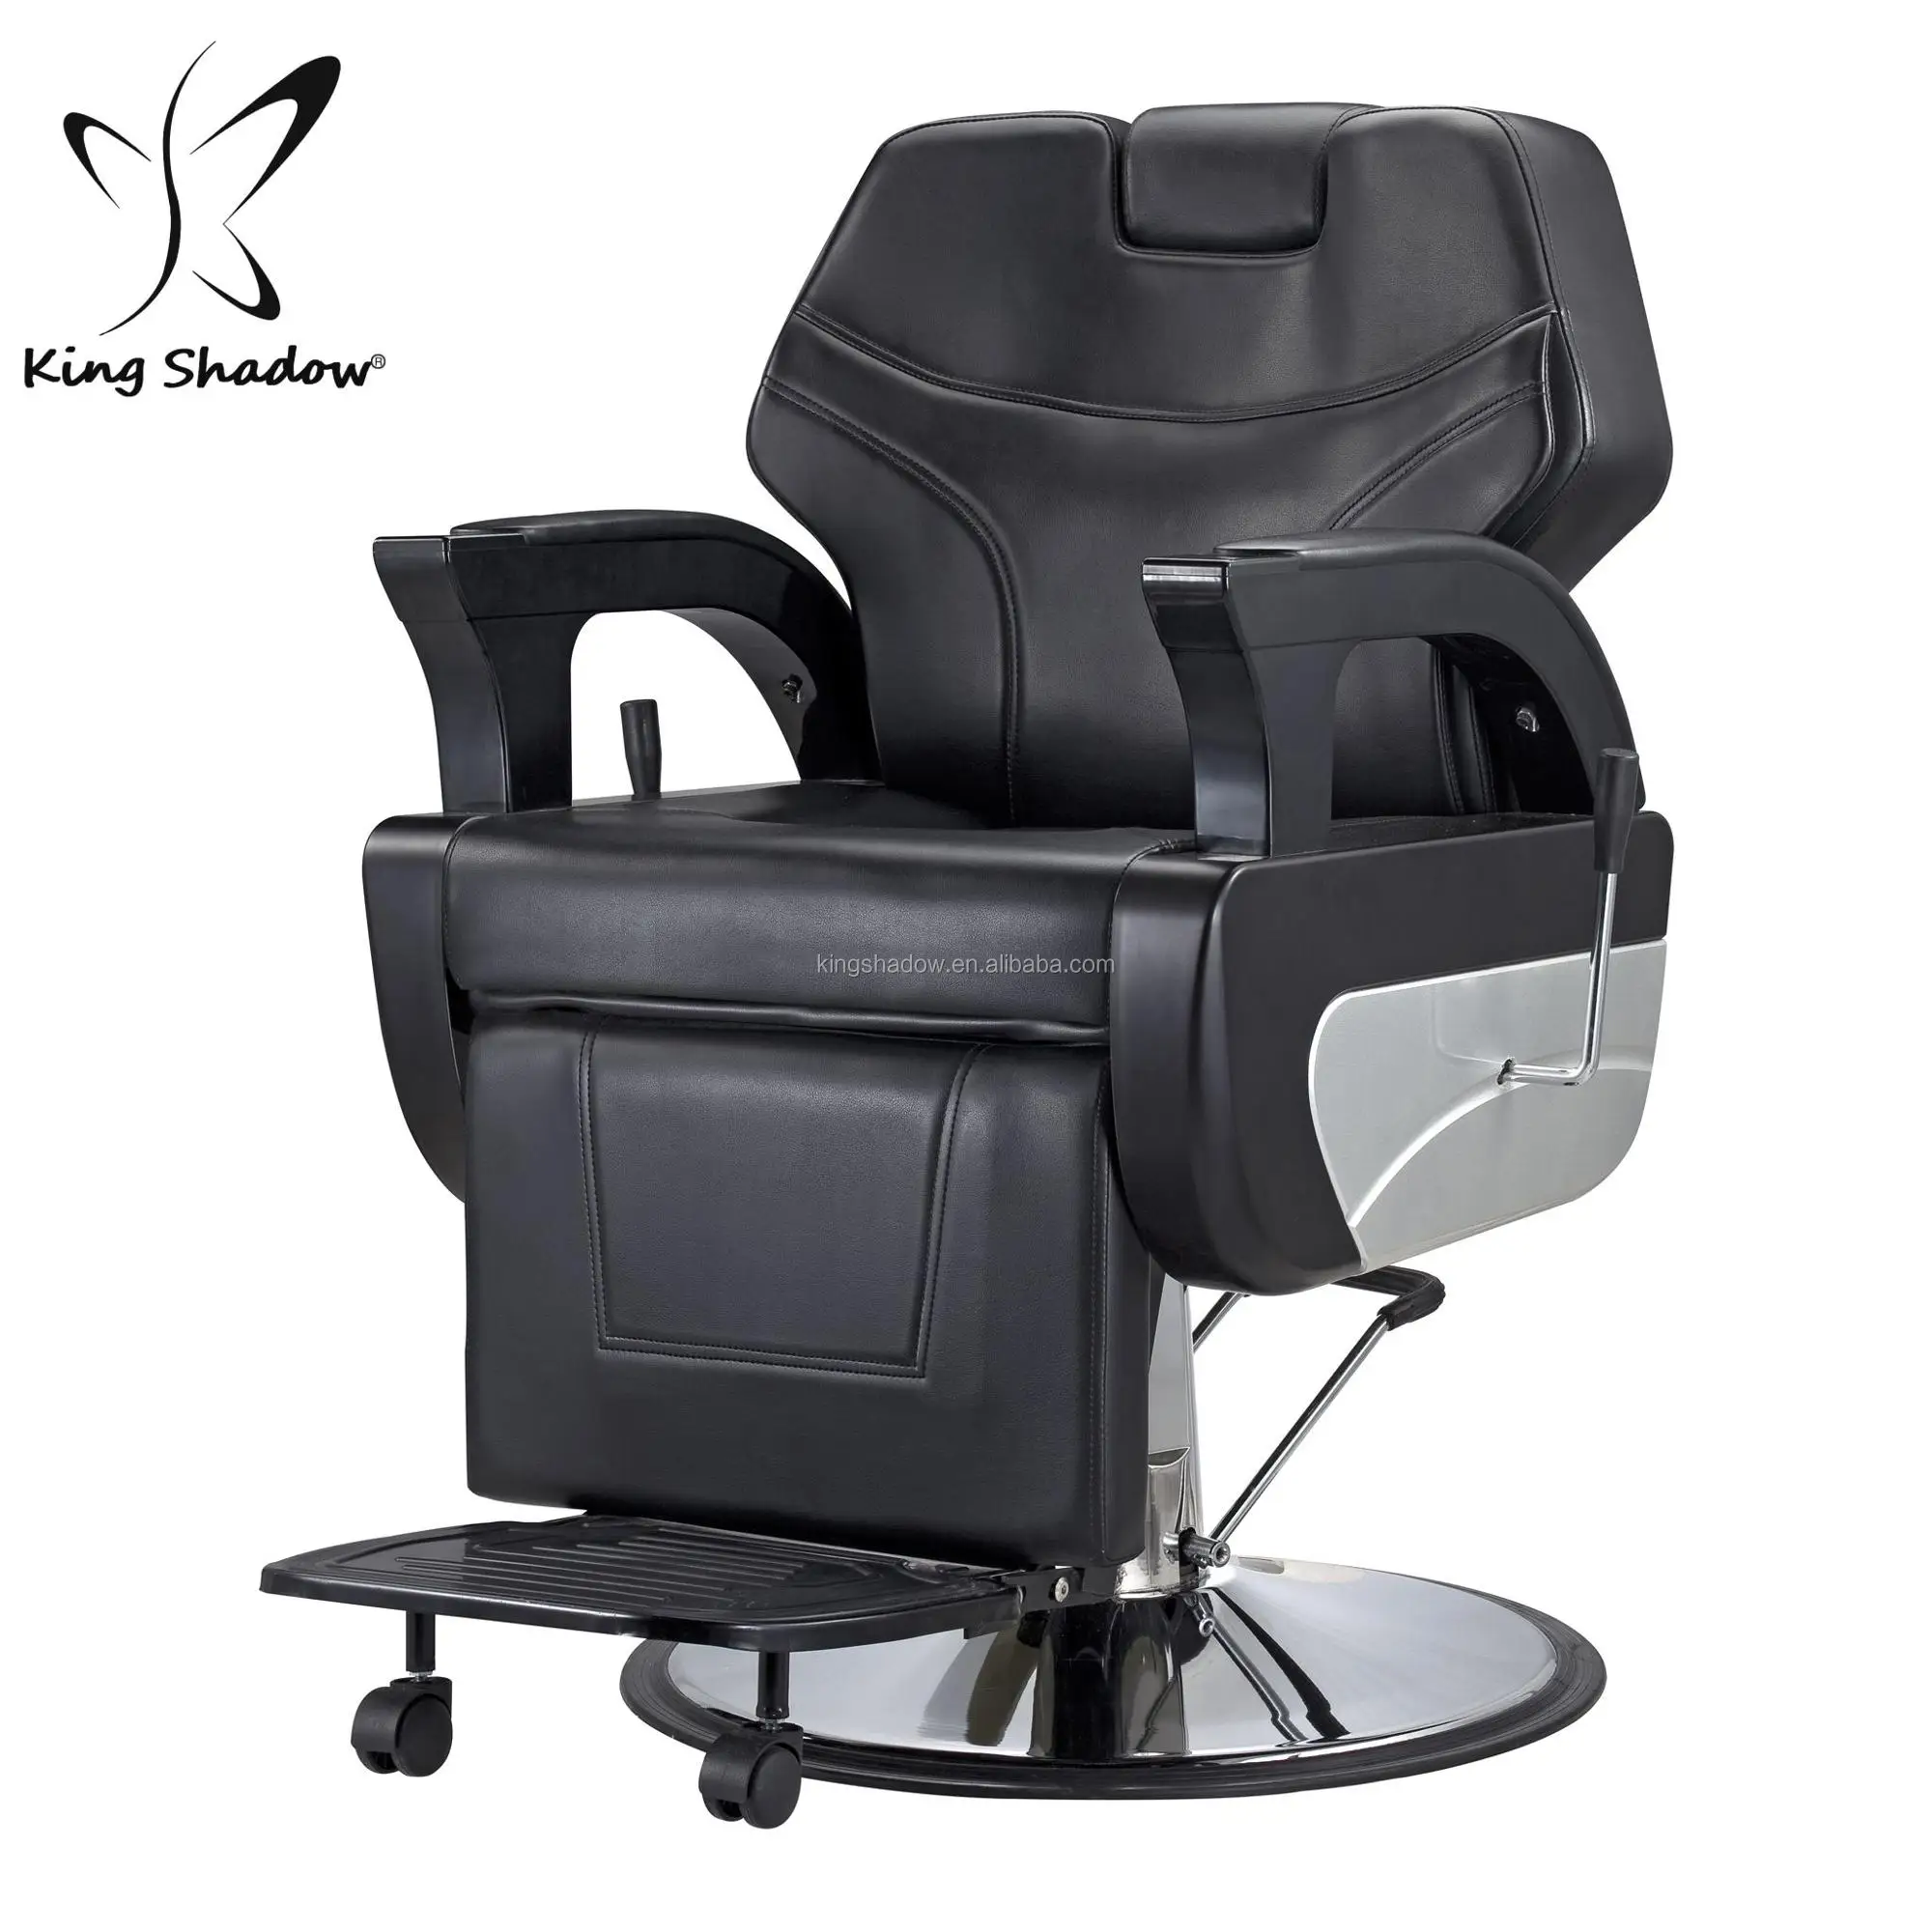 New Fashion Man Styling Barber Chair Price Second Hand Vintage